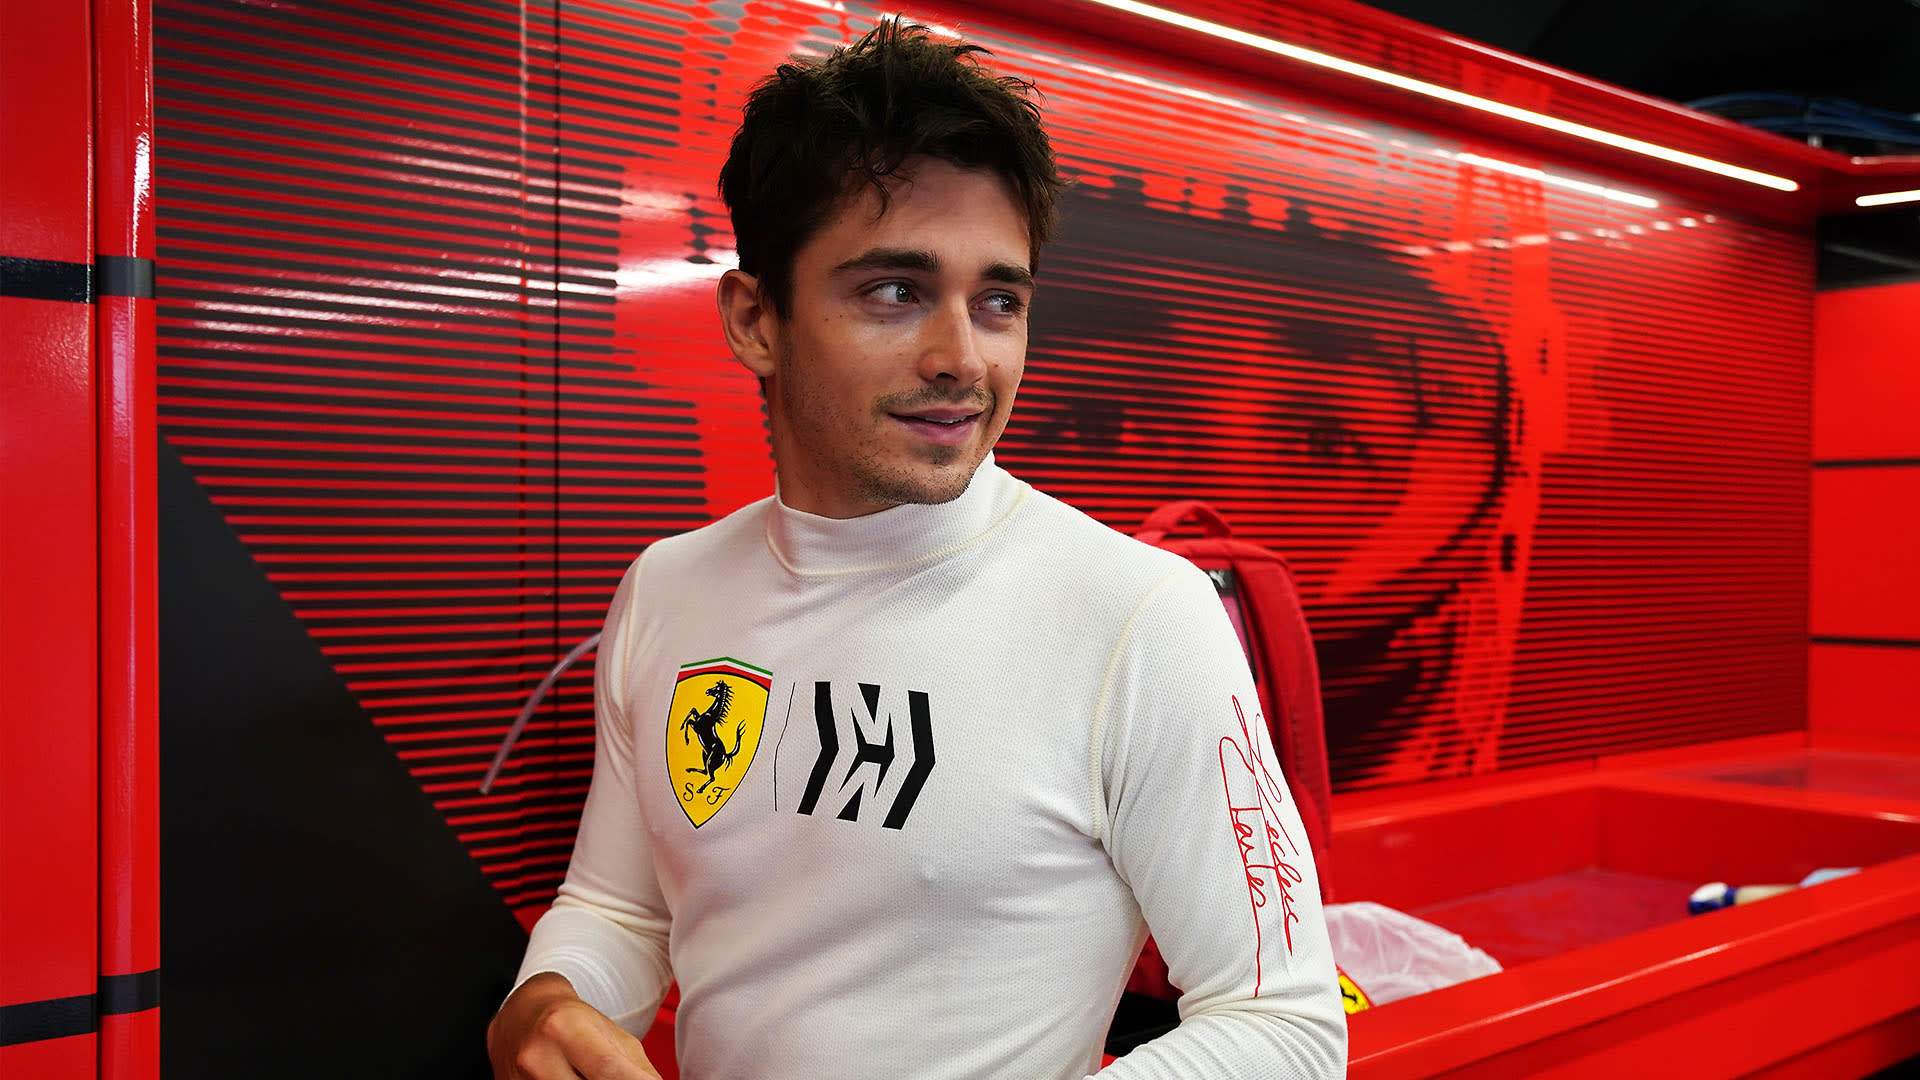 Ferrari want to fight for wins ‘very soon’ reveals Leclerc, as he says ...